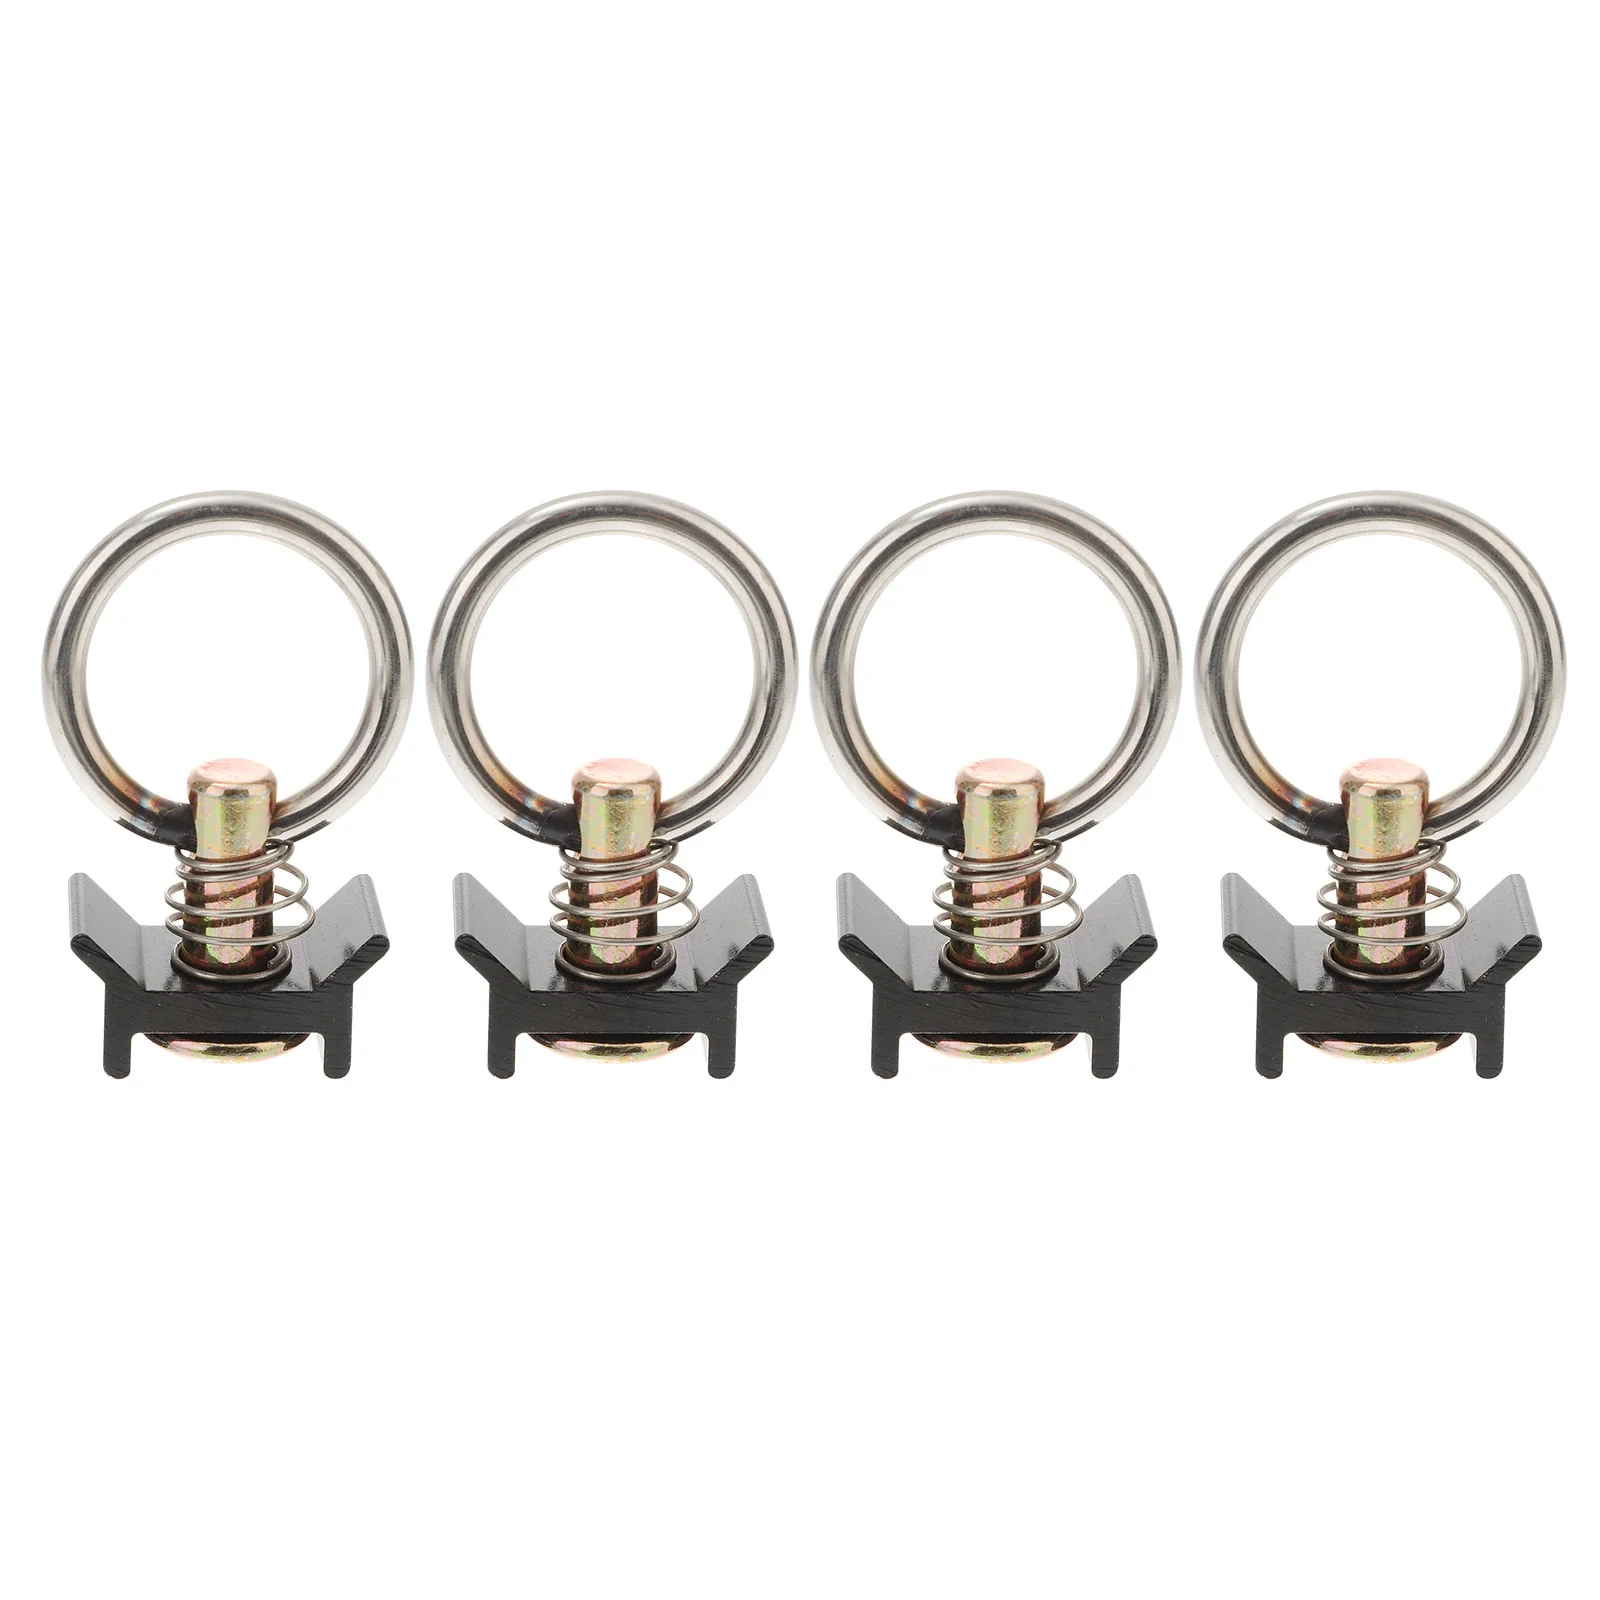 

4 Pcs E Track Accessories Cargo Control Tie Downs Round Ring Tie-down Anchor Stainless Steel Rails Fittings